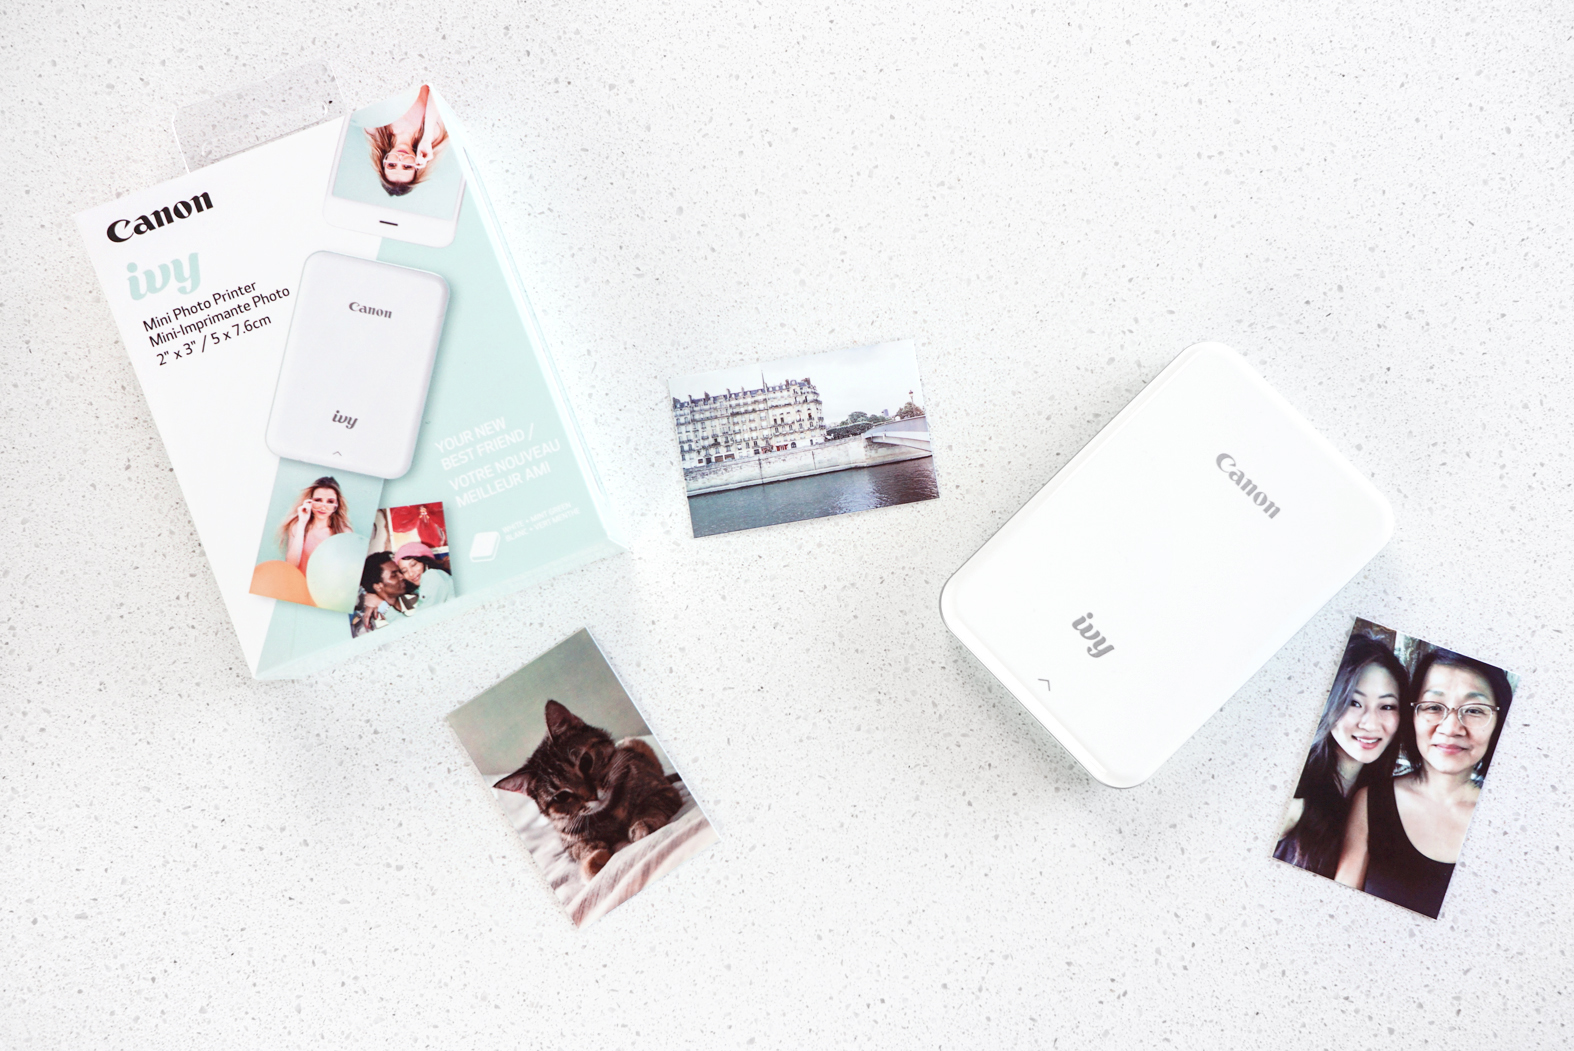 canon ivy wireless photo printer review